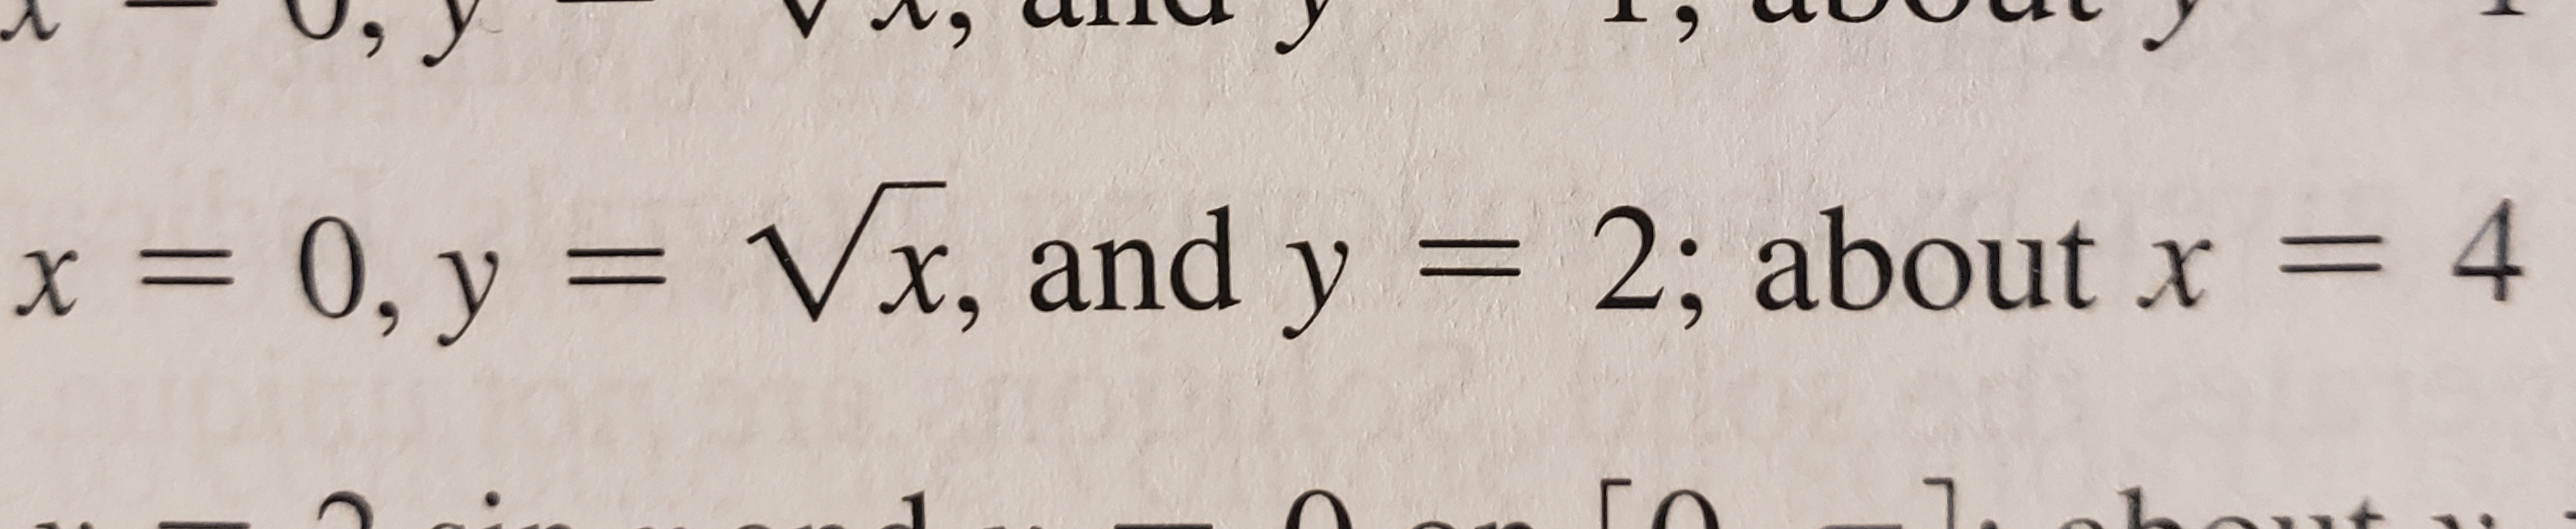 = 2; about x = 4
x = 0, y = Vx, and y
